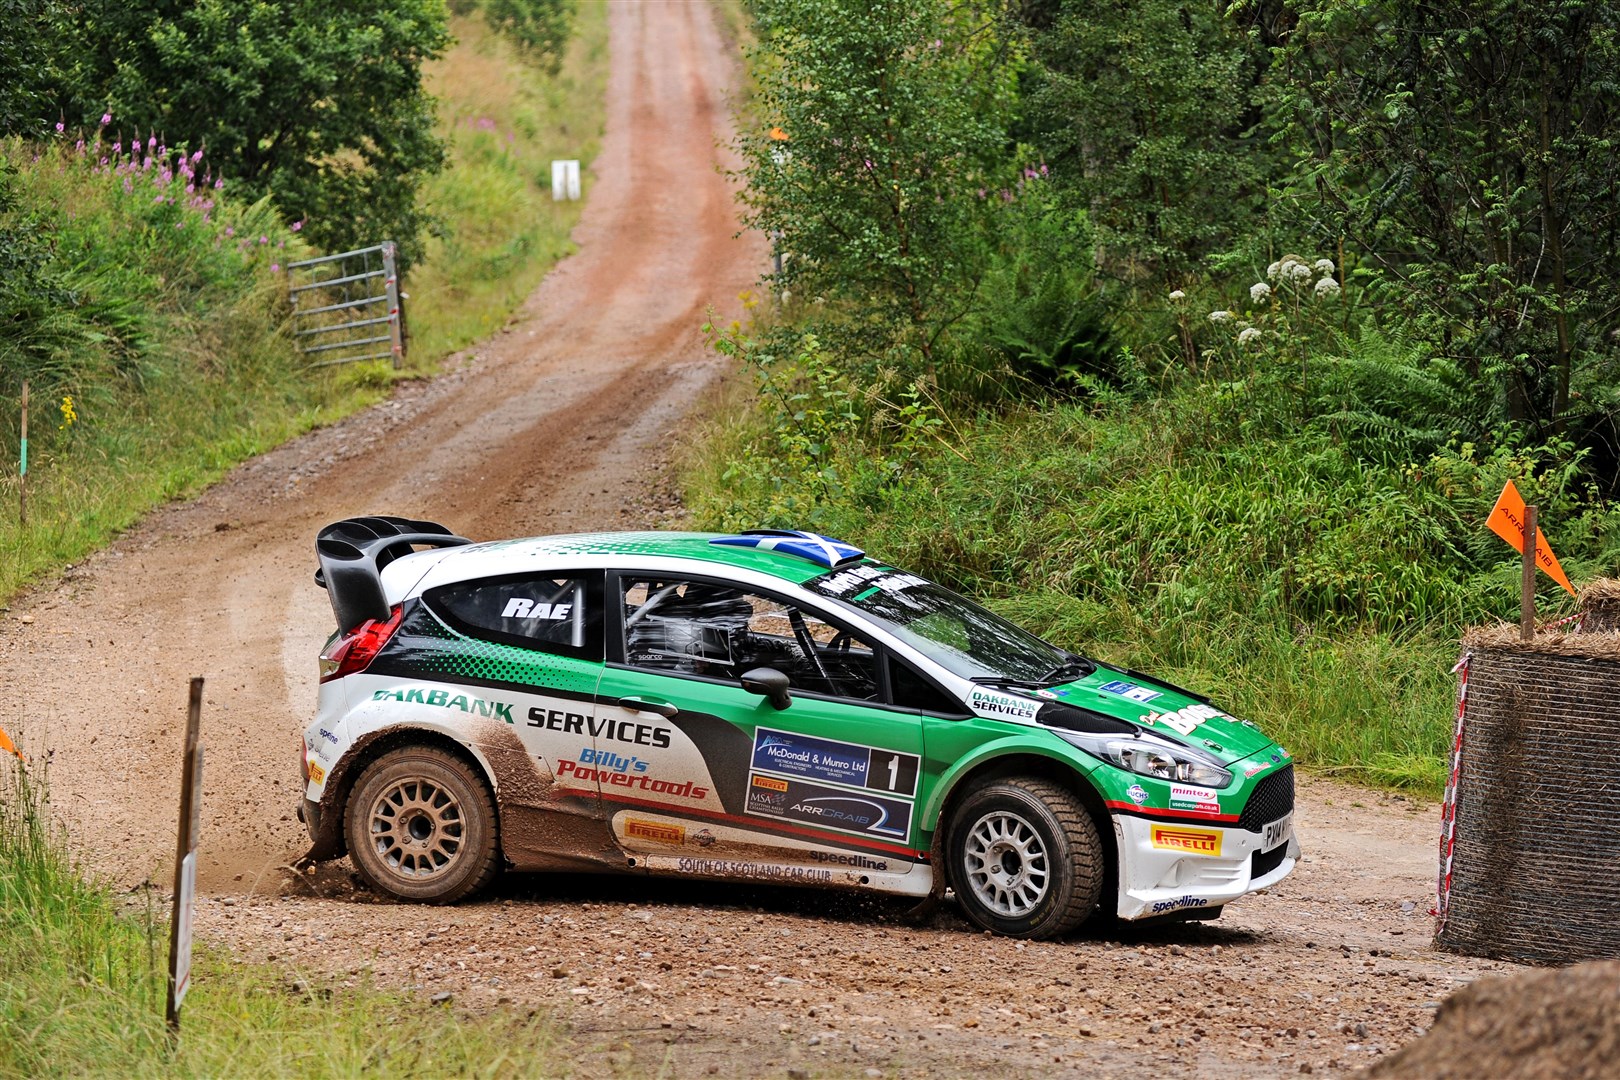 2014 Speyside Stages winners David Bogie and Kevin Rae in their Ford Fiesta R5+. Picture: Daniel Forsyth.